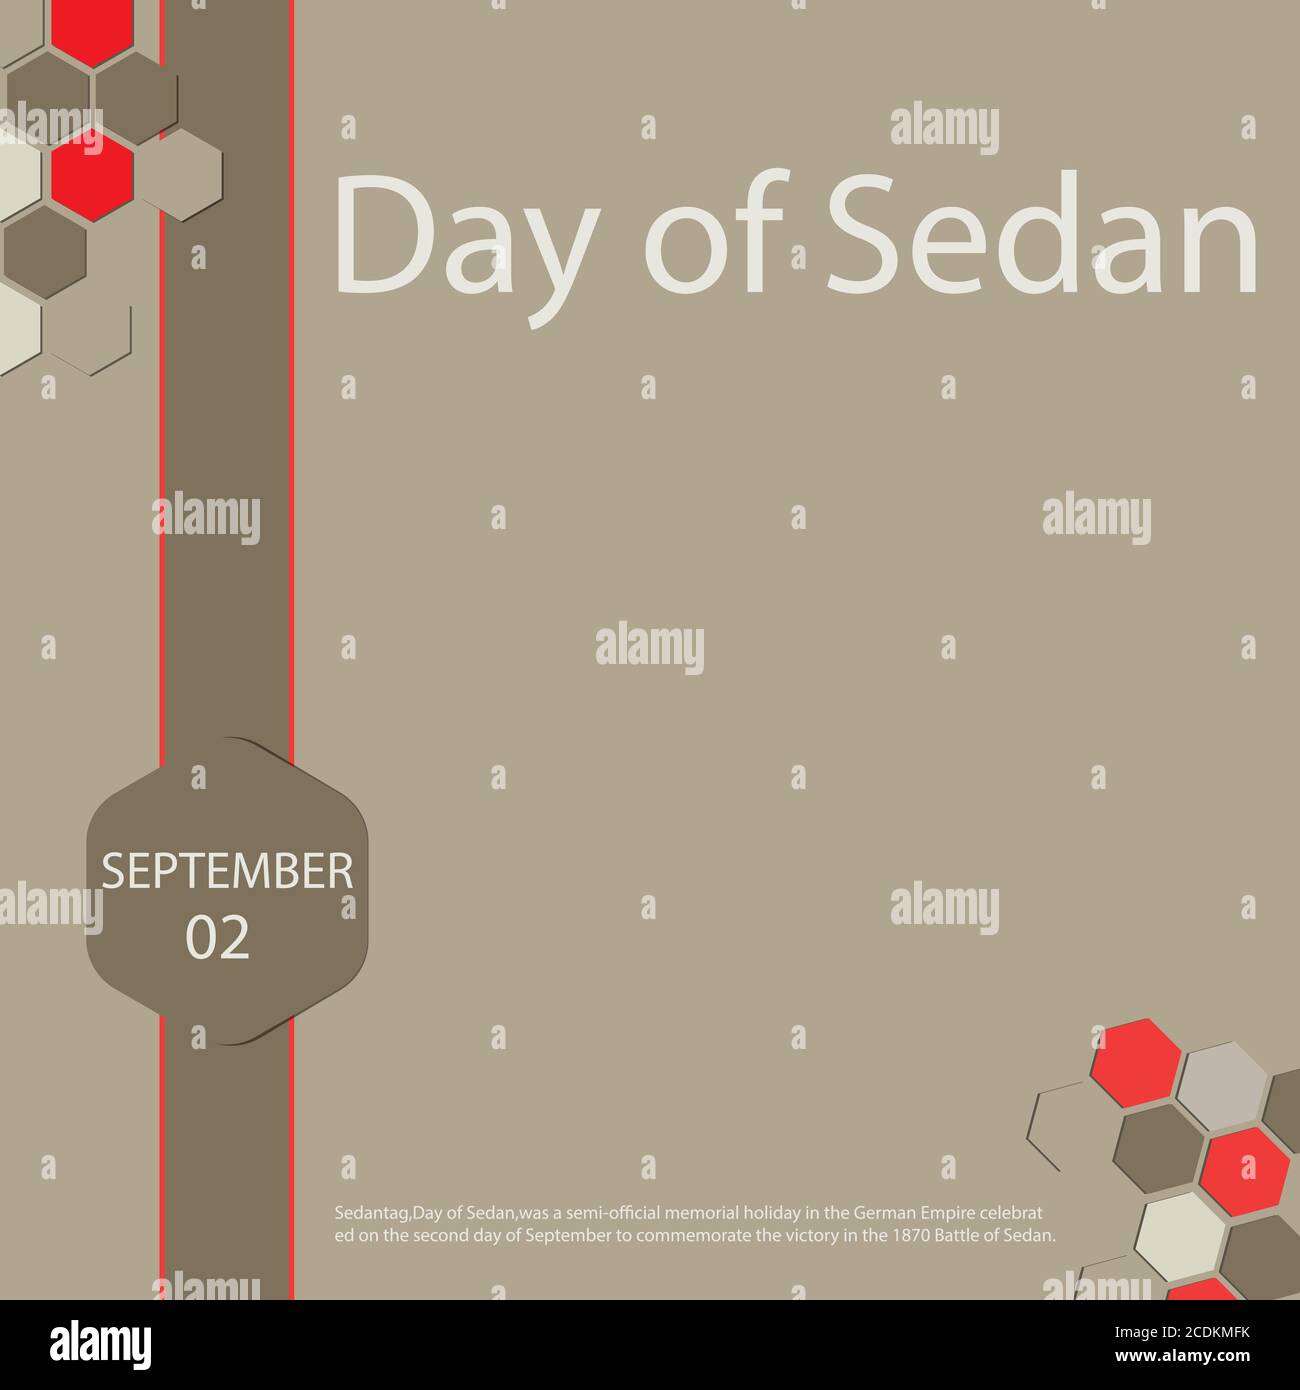 Sedantag,Day of Sedan,was a semi-official memorial holiday in the German Empire celebrated on the second day of September to commemorate the victory i Stock Vector